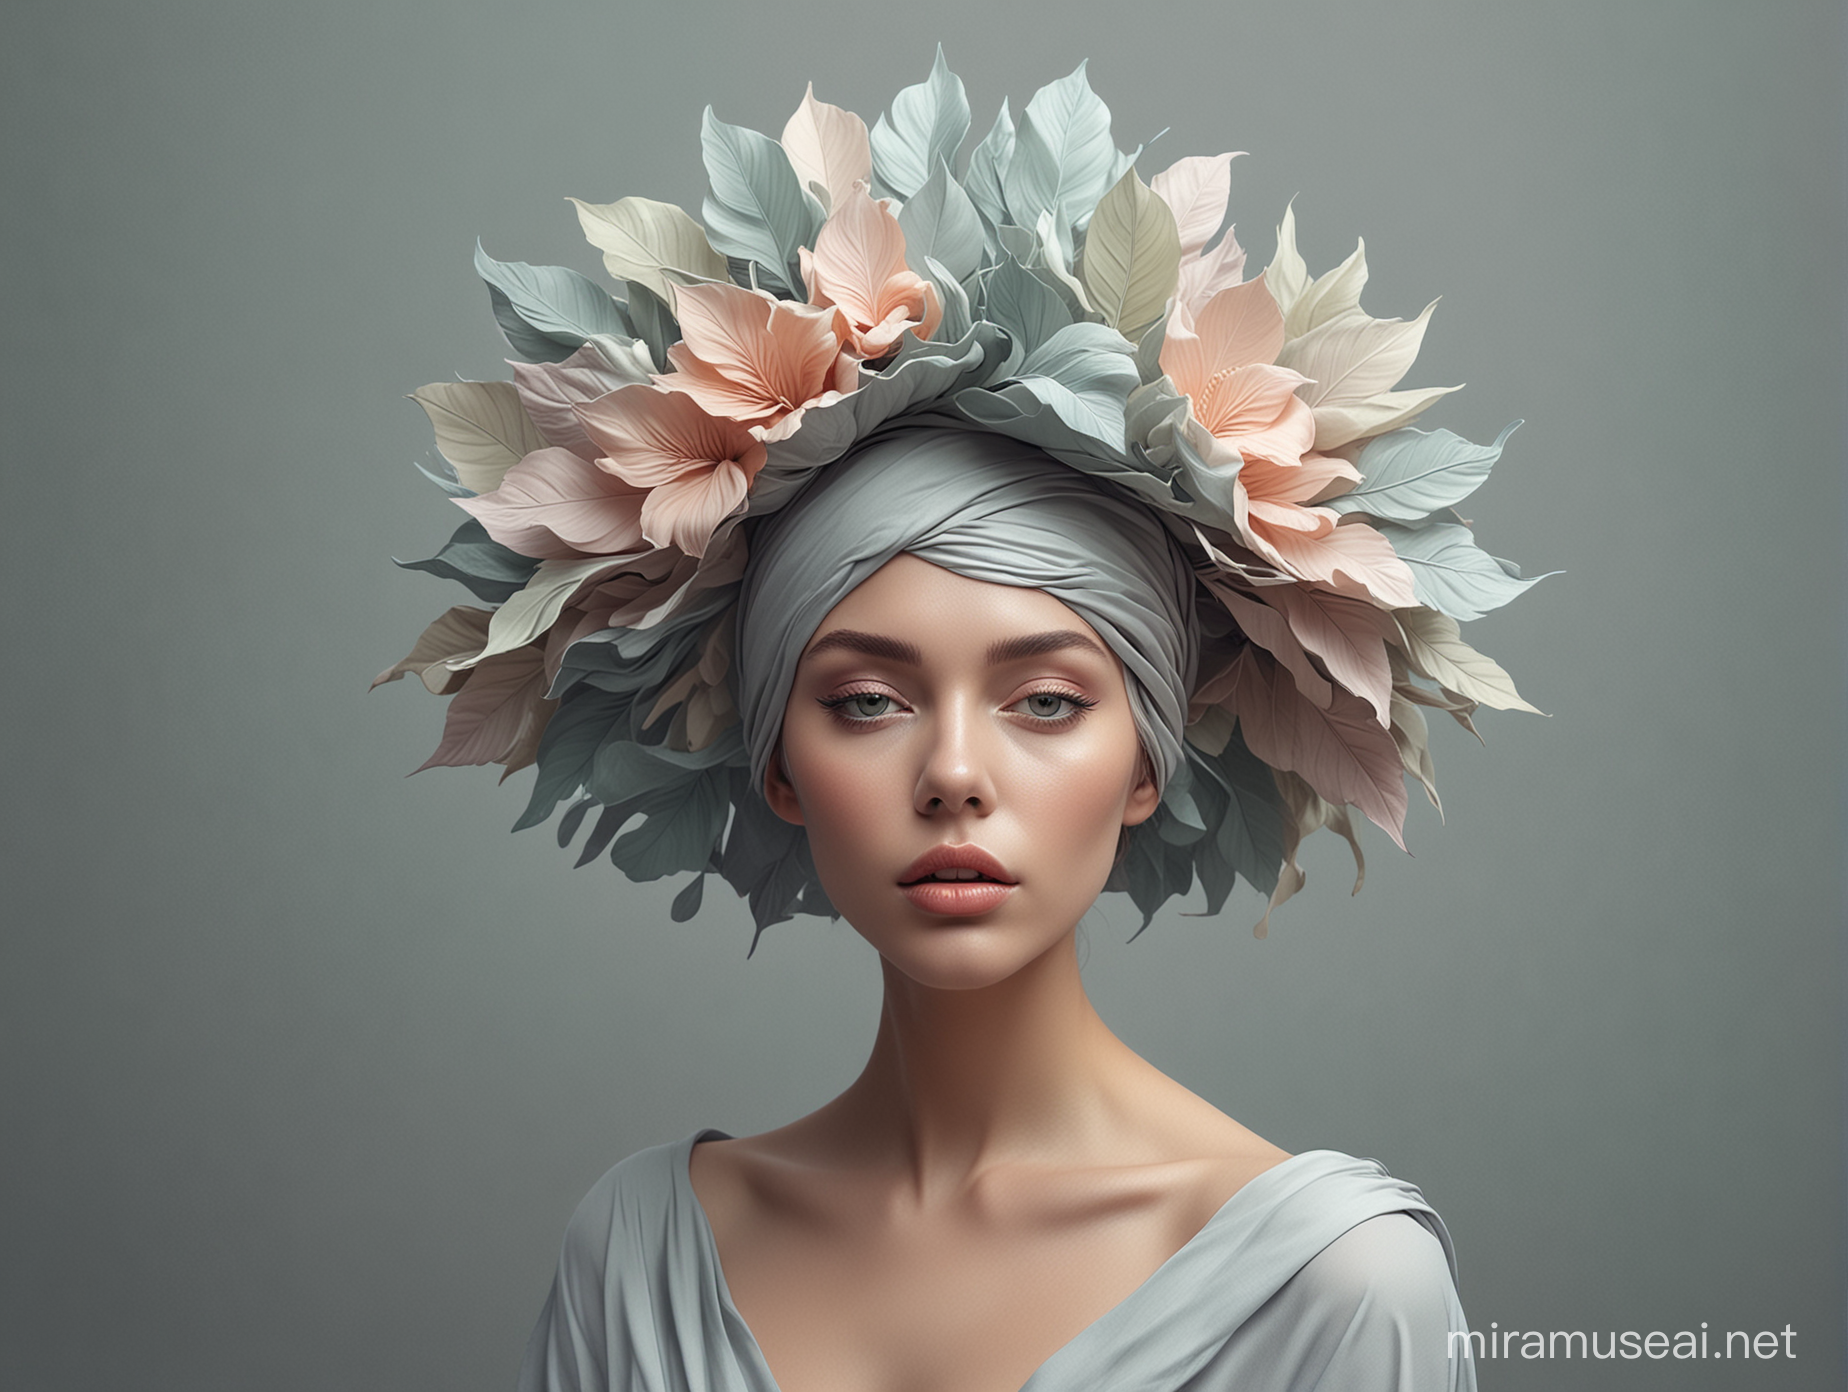 A surreal digital artwork of an elegant woman with soft pastel color, sculptural headwear made from large petals and leaves, set against a grey background. The figure is dressed in sleek attire, adding to the overall minimalistic aesthetic. Her pose exudes confidence as she stands tall amidst the soft misty atmosphere. The artwork is in the style of a minimalist digital artist